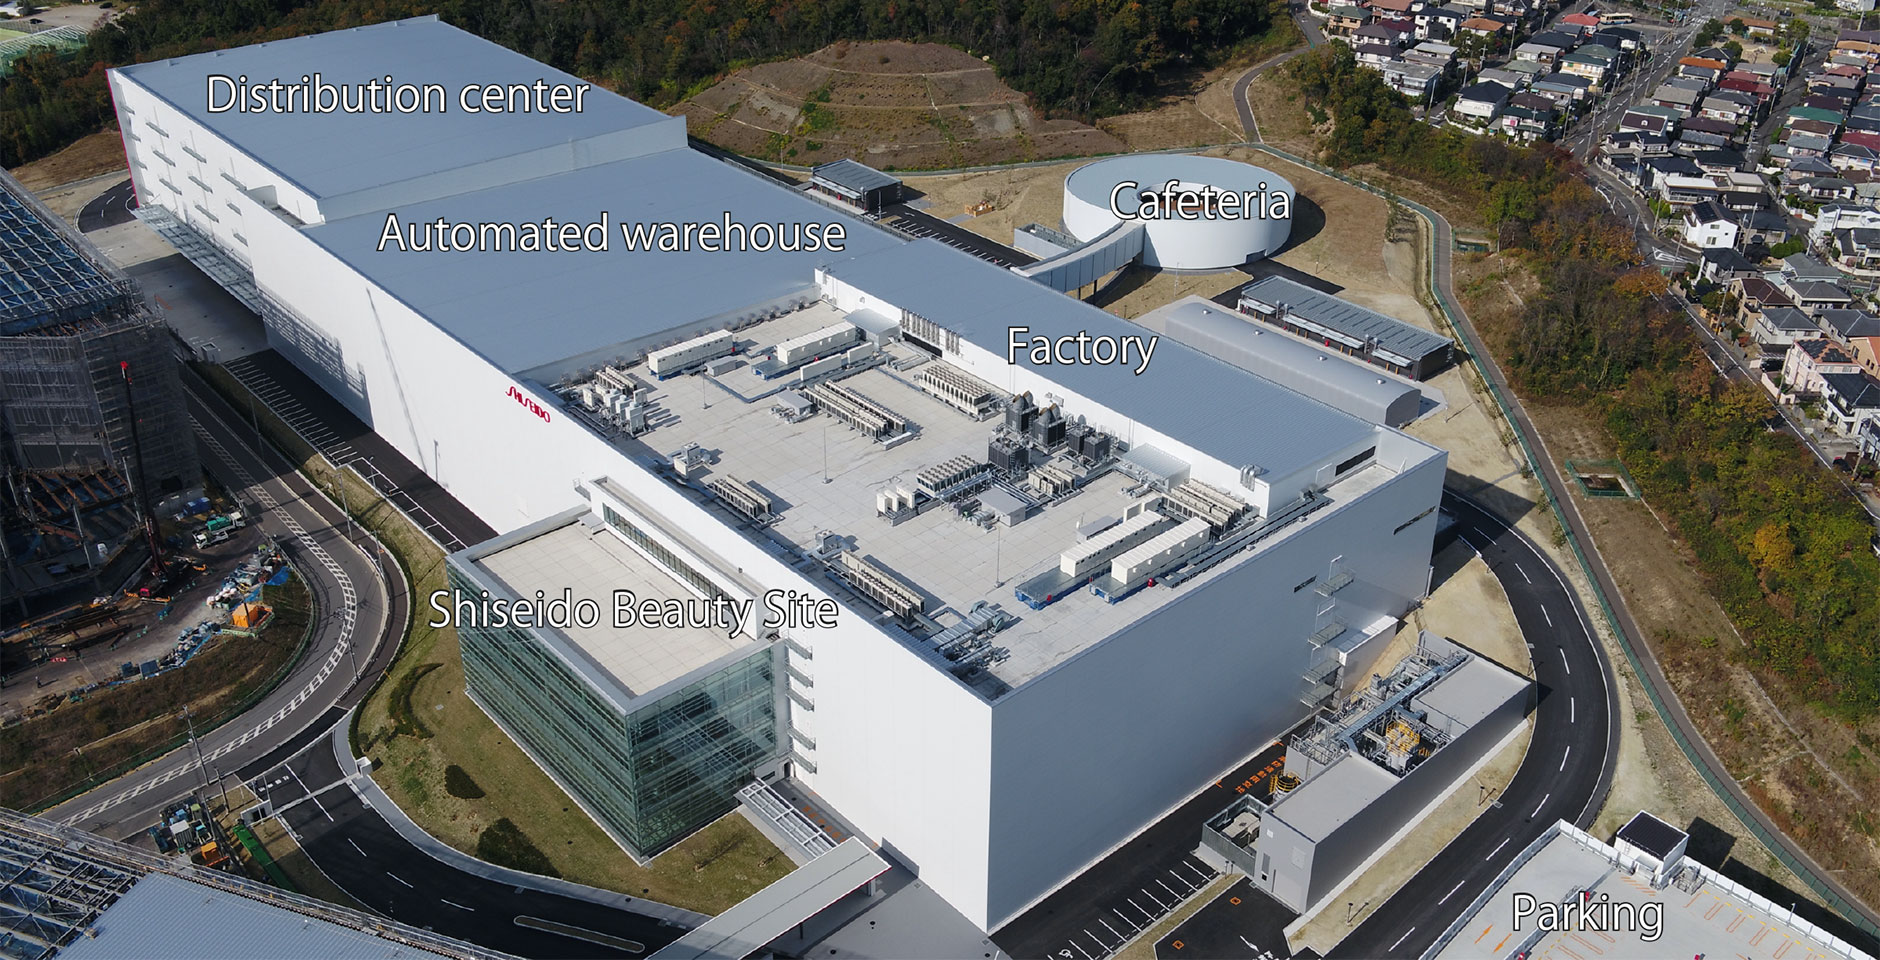 The single edifice includes a factory, an automated warehouse, and a distribution center. Shiseido Beauty Site adjoins the façade of the building, while a cafeteria is attached at the rear. The elevation difference between the front and rear is 13.5 m. 